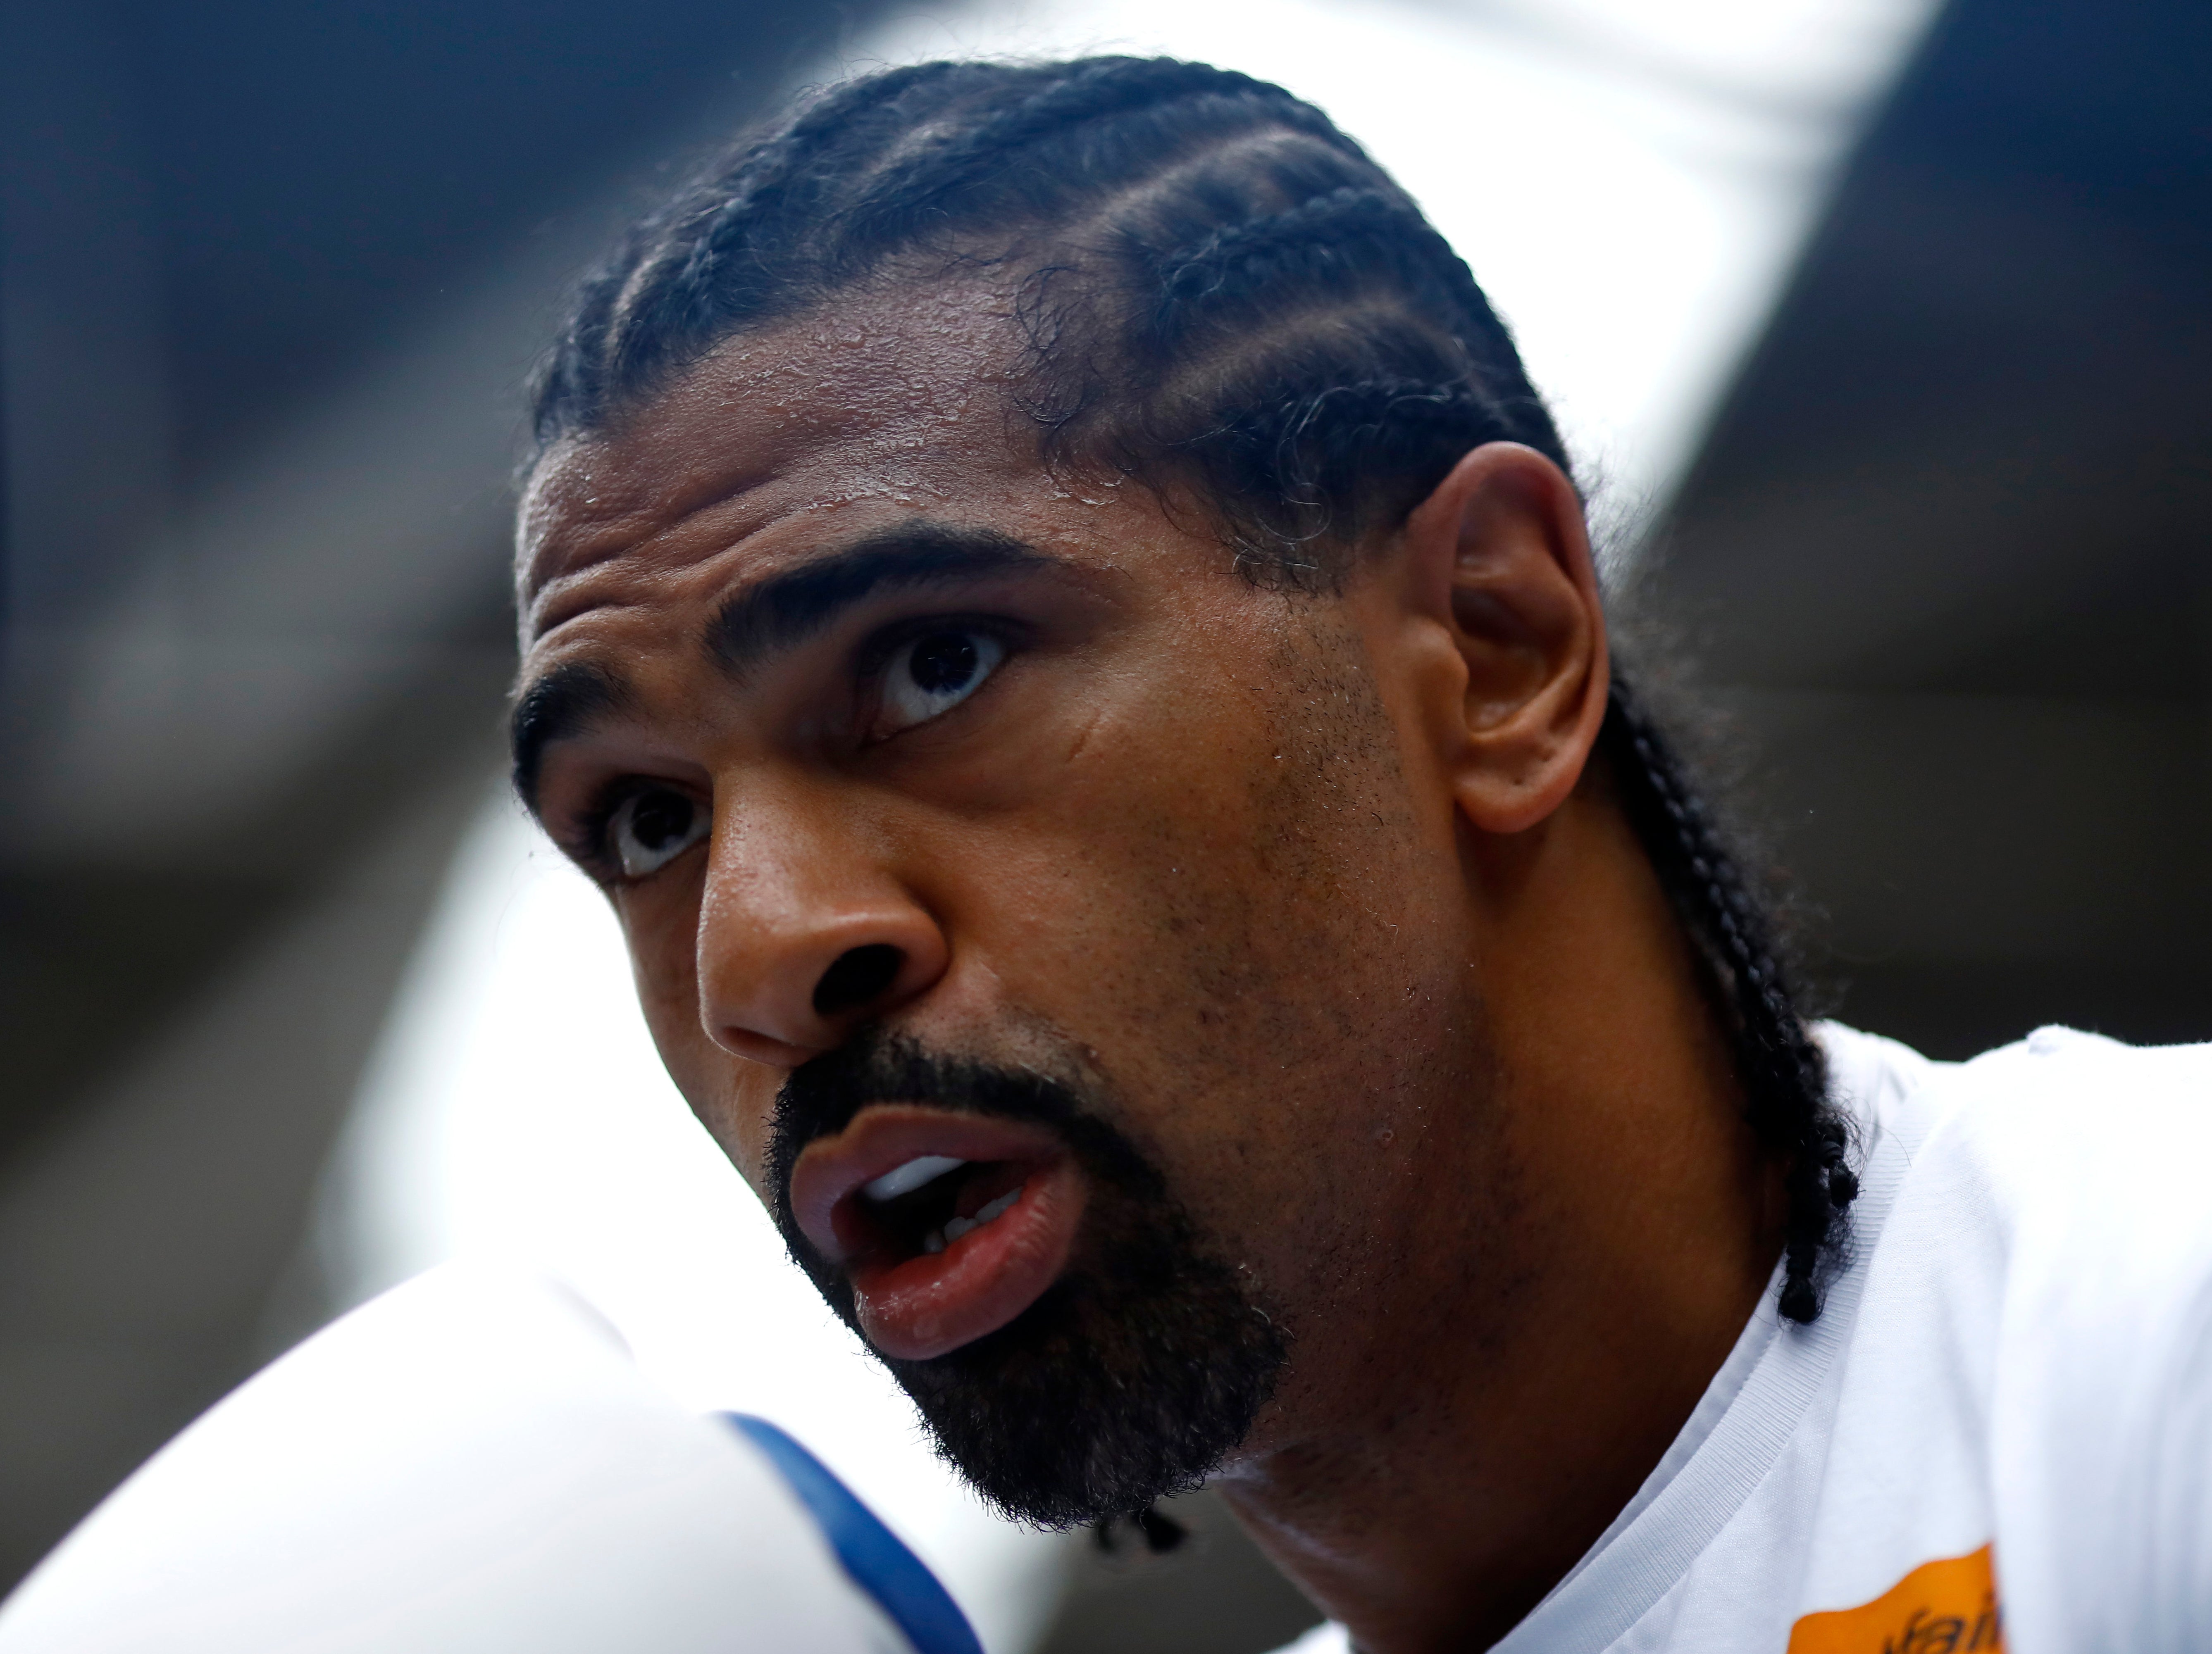 David Haye at an open workout in 2018 ahead of his final bout, against Tony Bellew